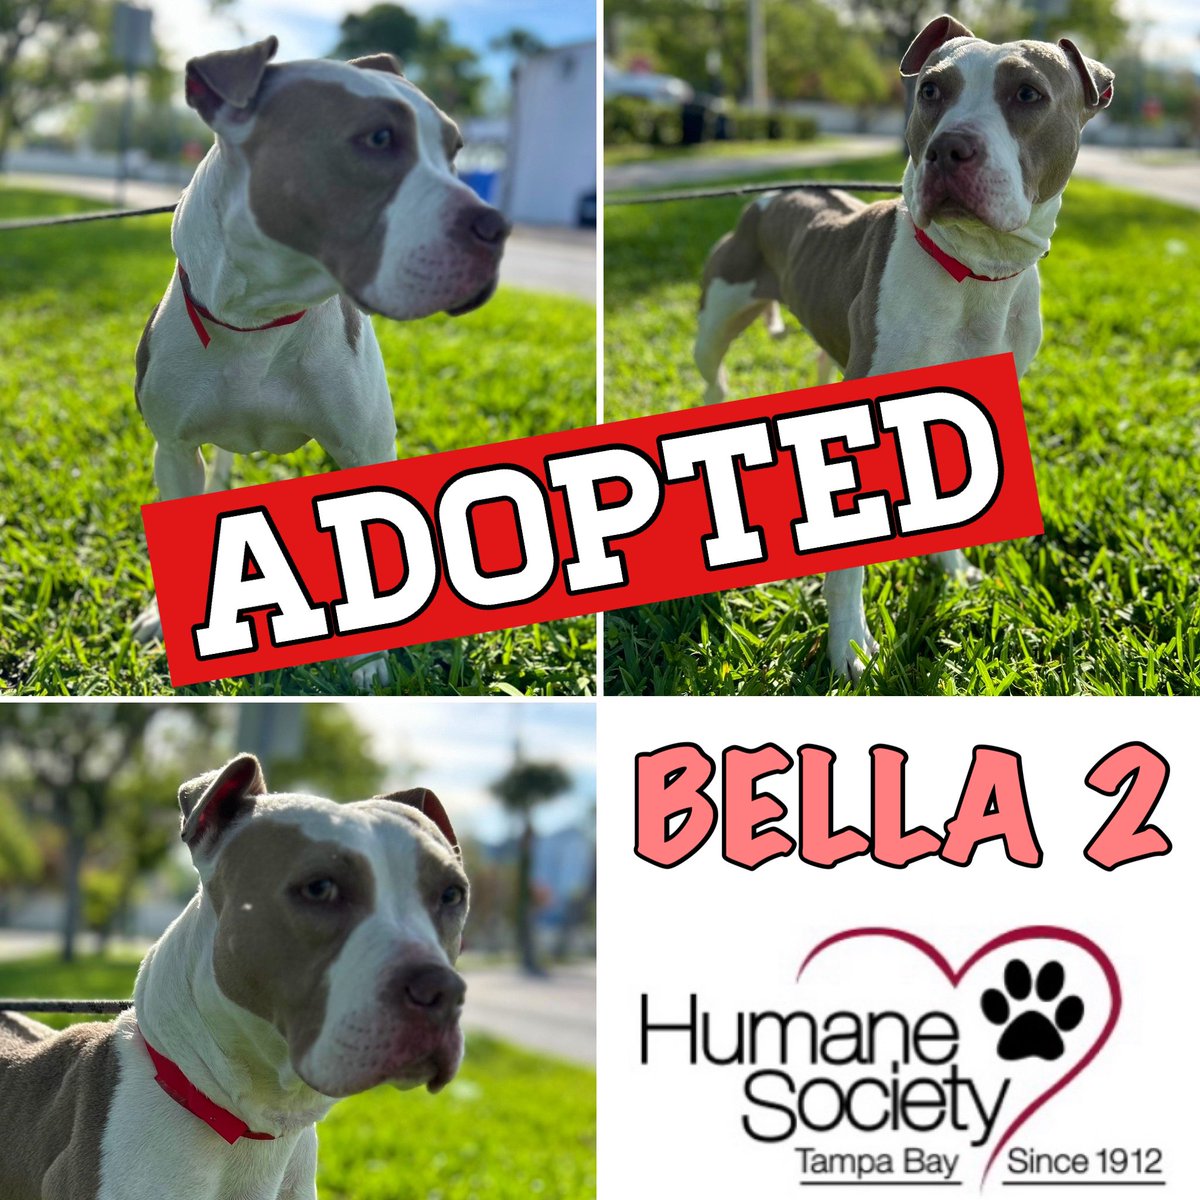 UPDATE / PUPDATE: Great News! BELLA 2 got ADOPTED! 😃 Congratulations to BELLA 2 and her new forever family! If you or anyone you know is looking for a BEST FRIEND please visit @HumaneTampaBay #adoptdontshop🐾